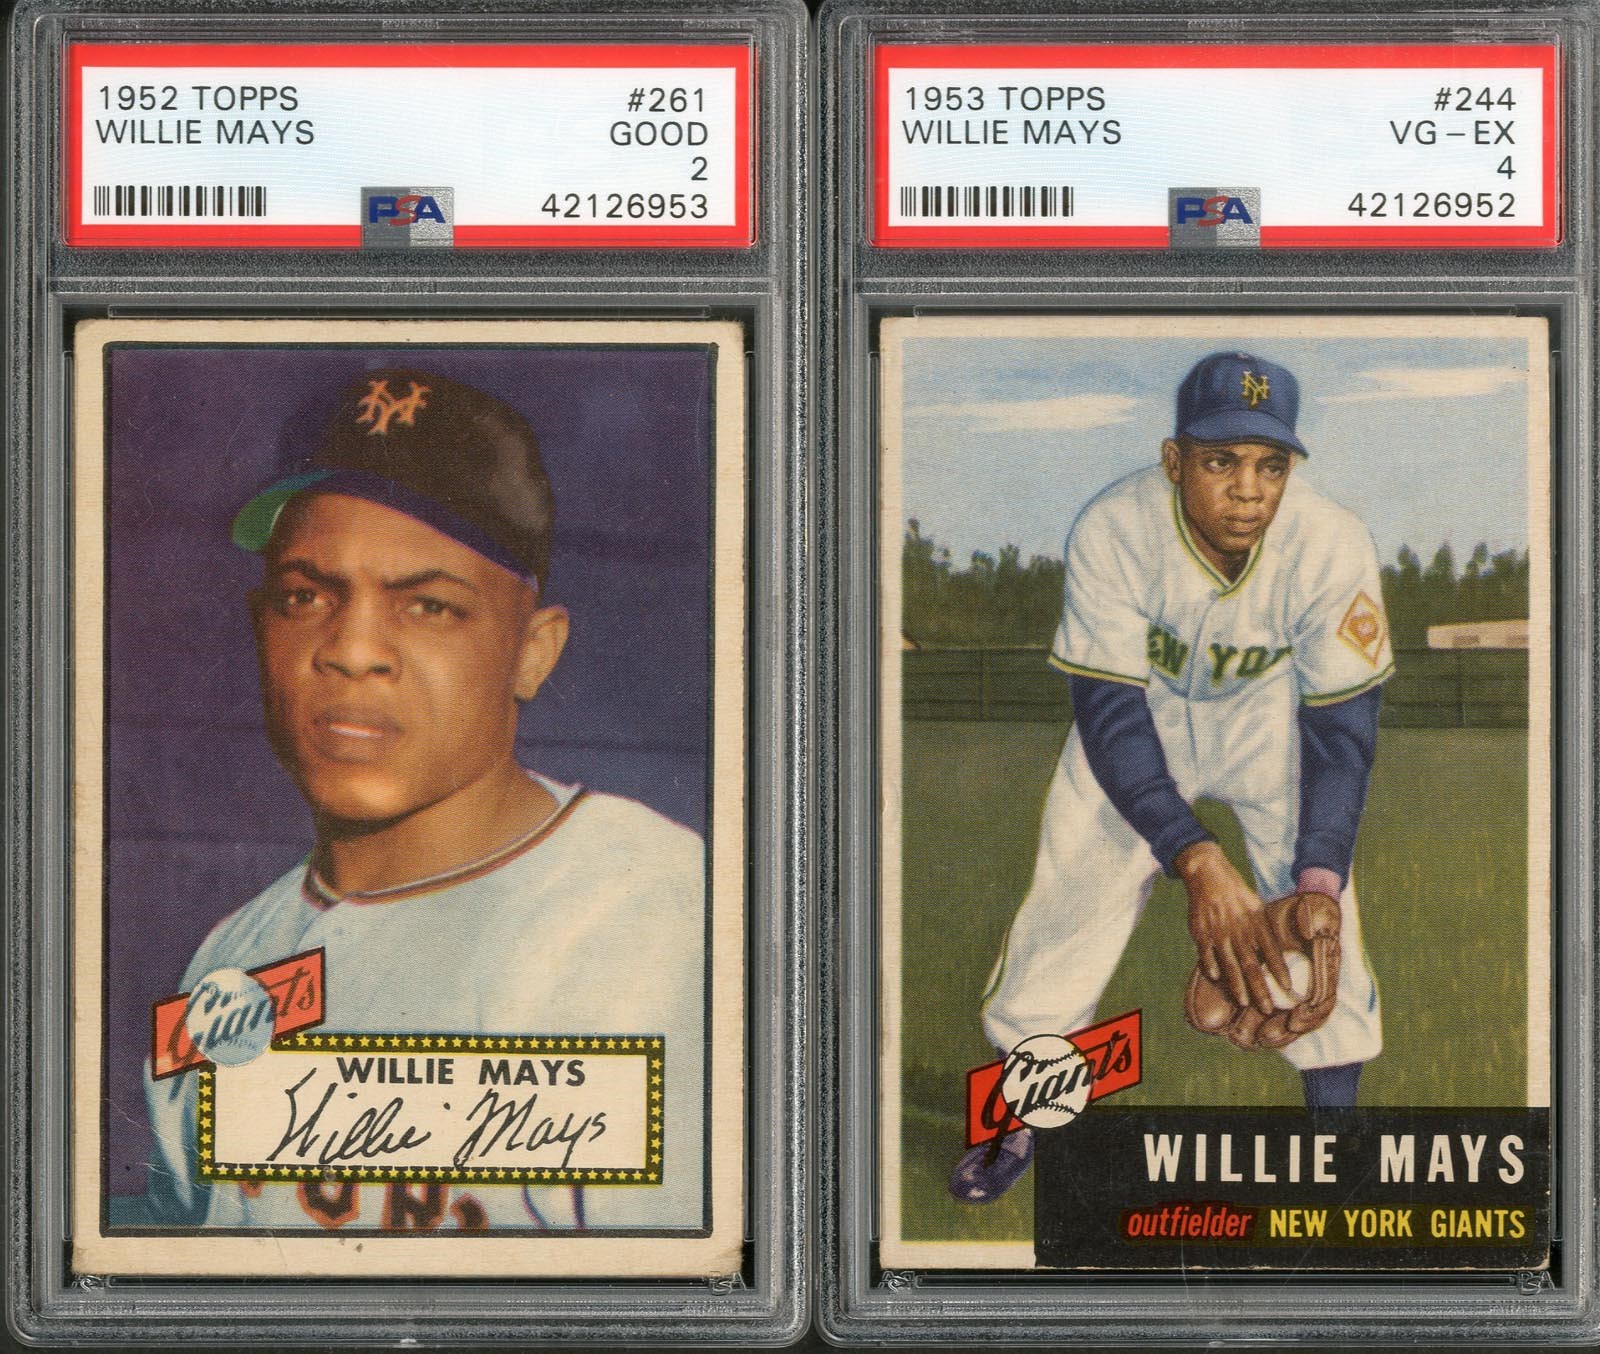 Baseball and Trading Cards - 1952 Topps Willie Mays (PSA 2) & 1953 Topps Willie Mays (PSA 4)